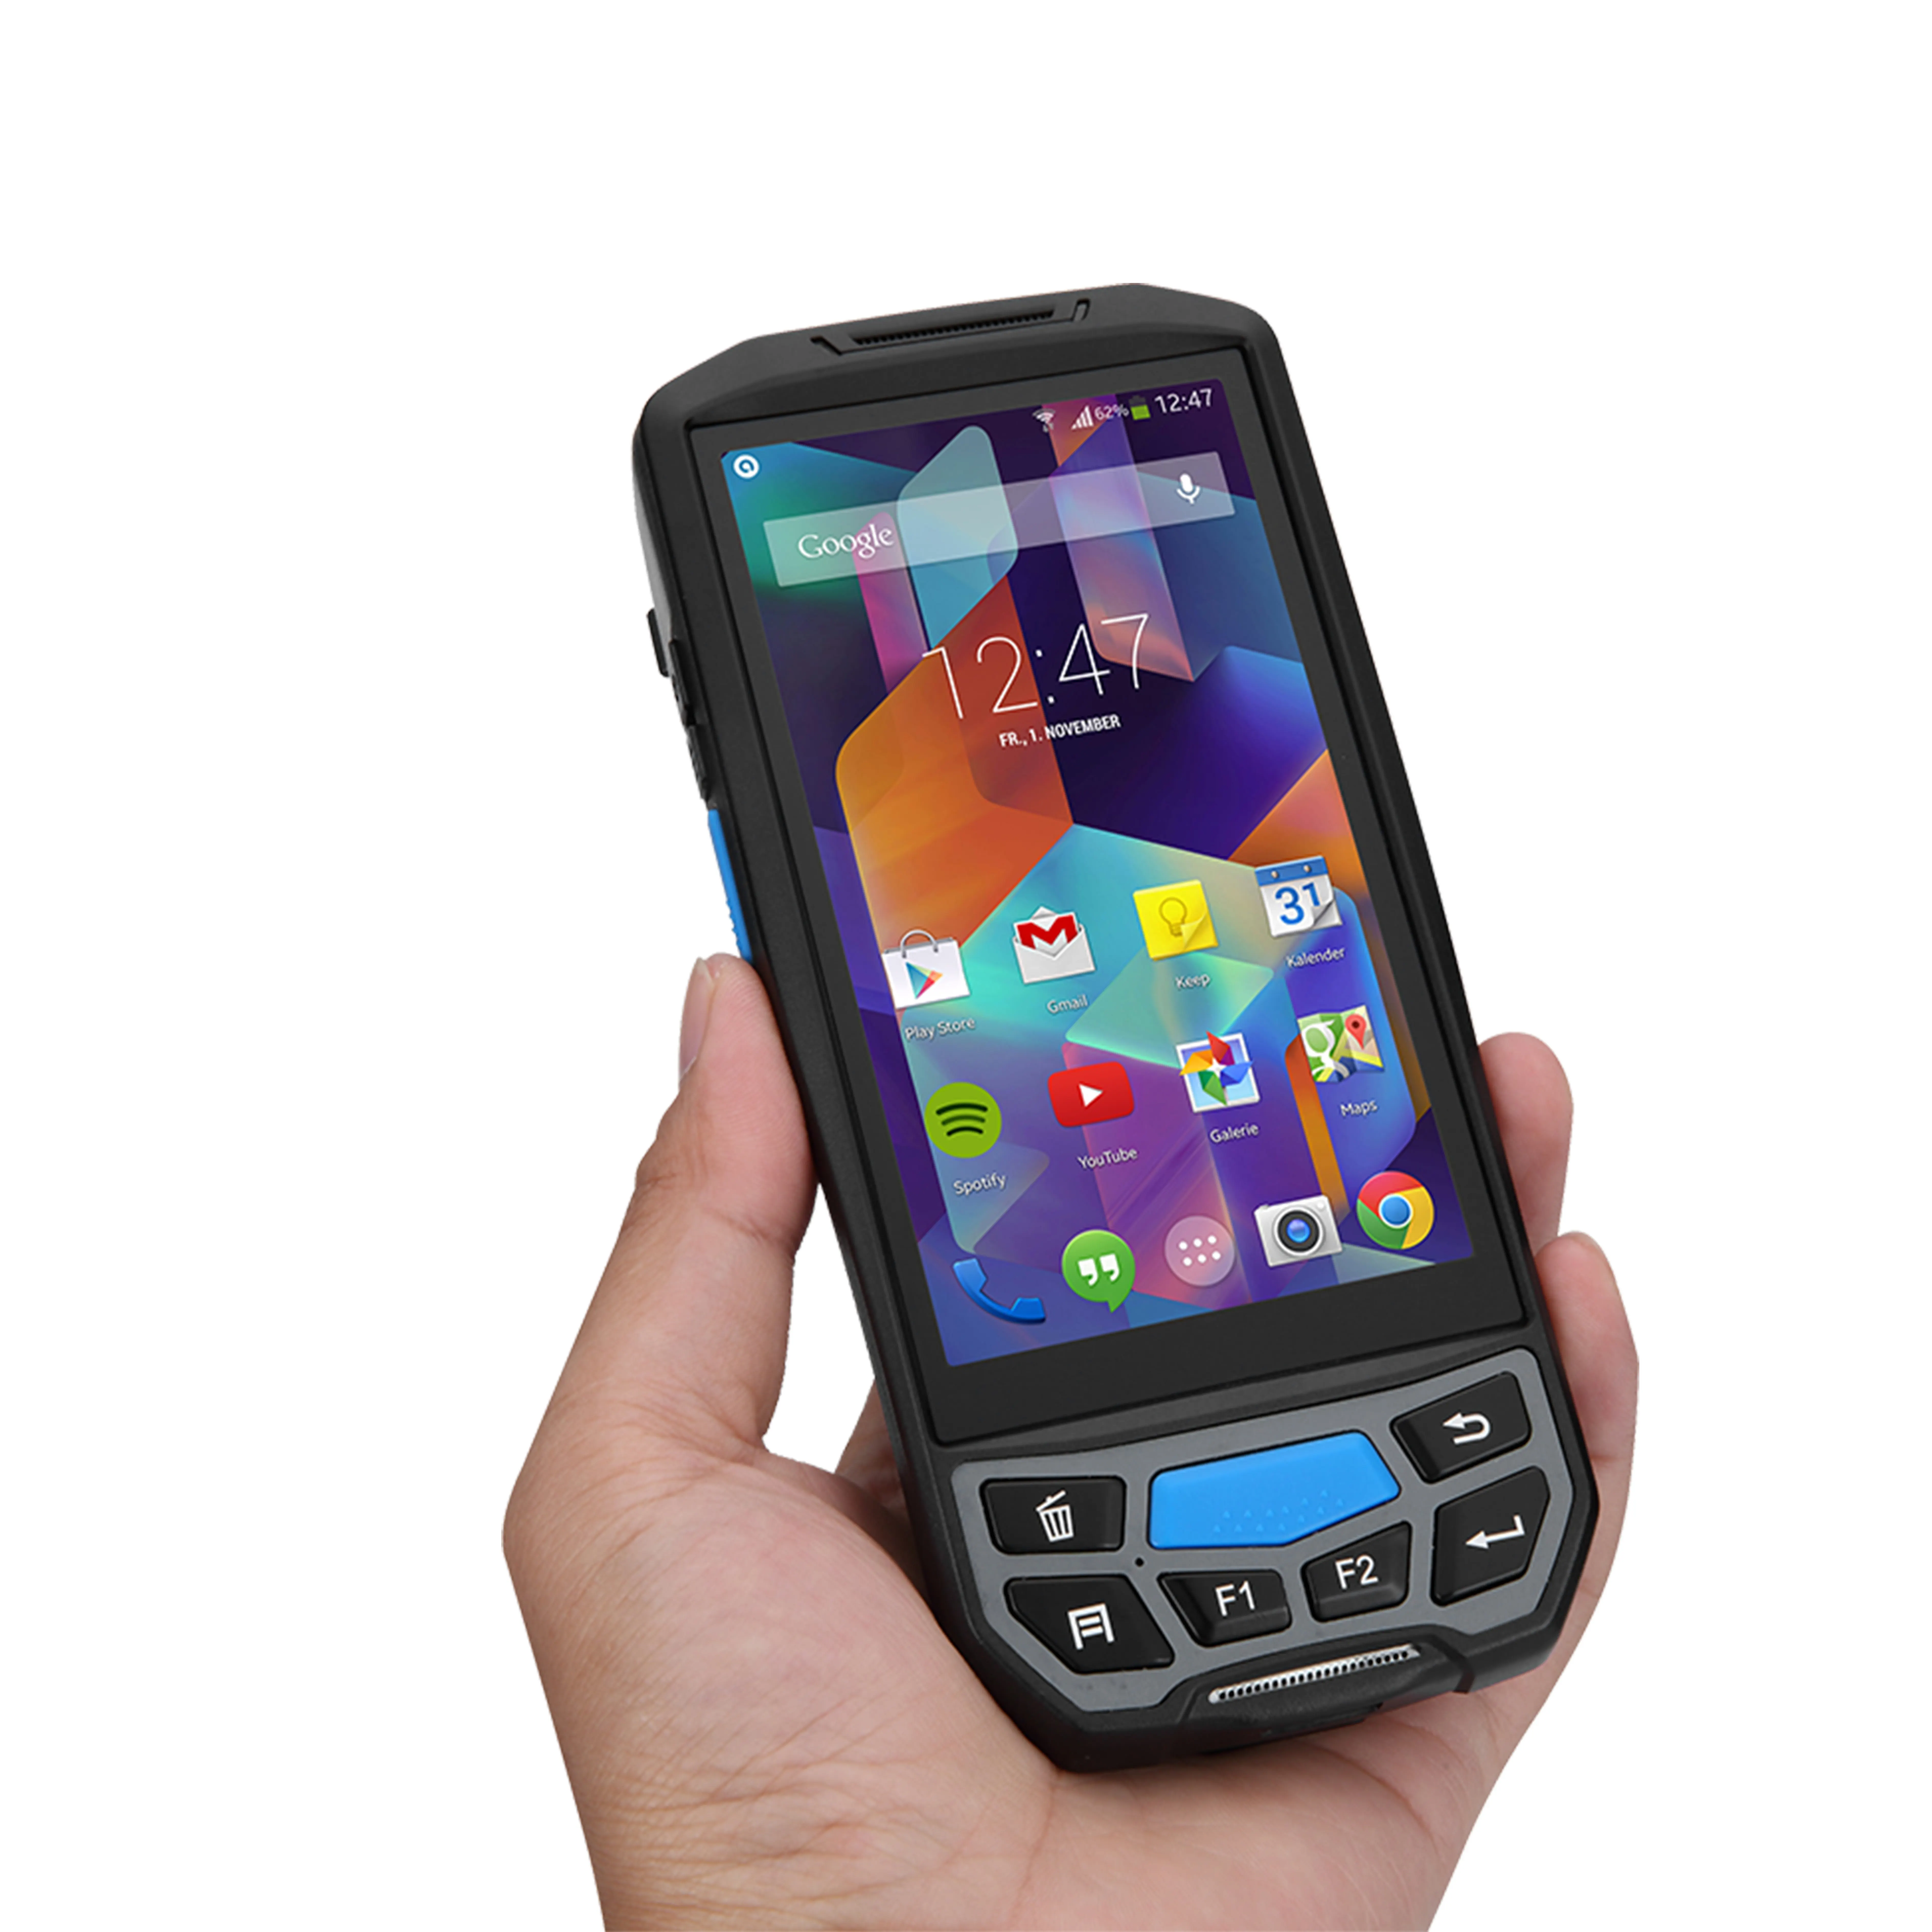 Blovedream U9000 Industrial Pda Android NFC RFID Data Collector Android 9.0 Handheld Terminal with RFID Reader Barcode Scanner